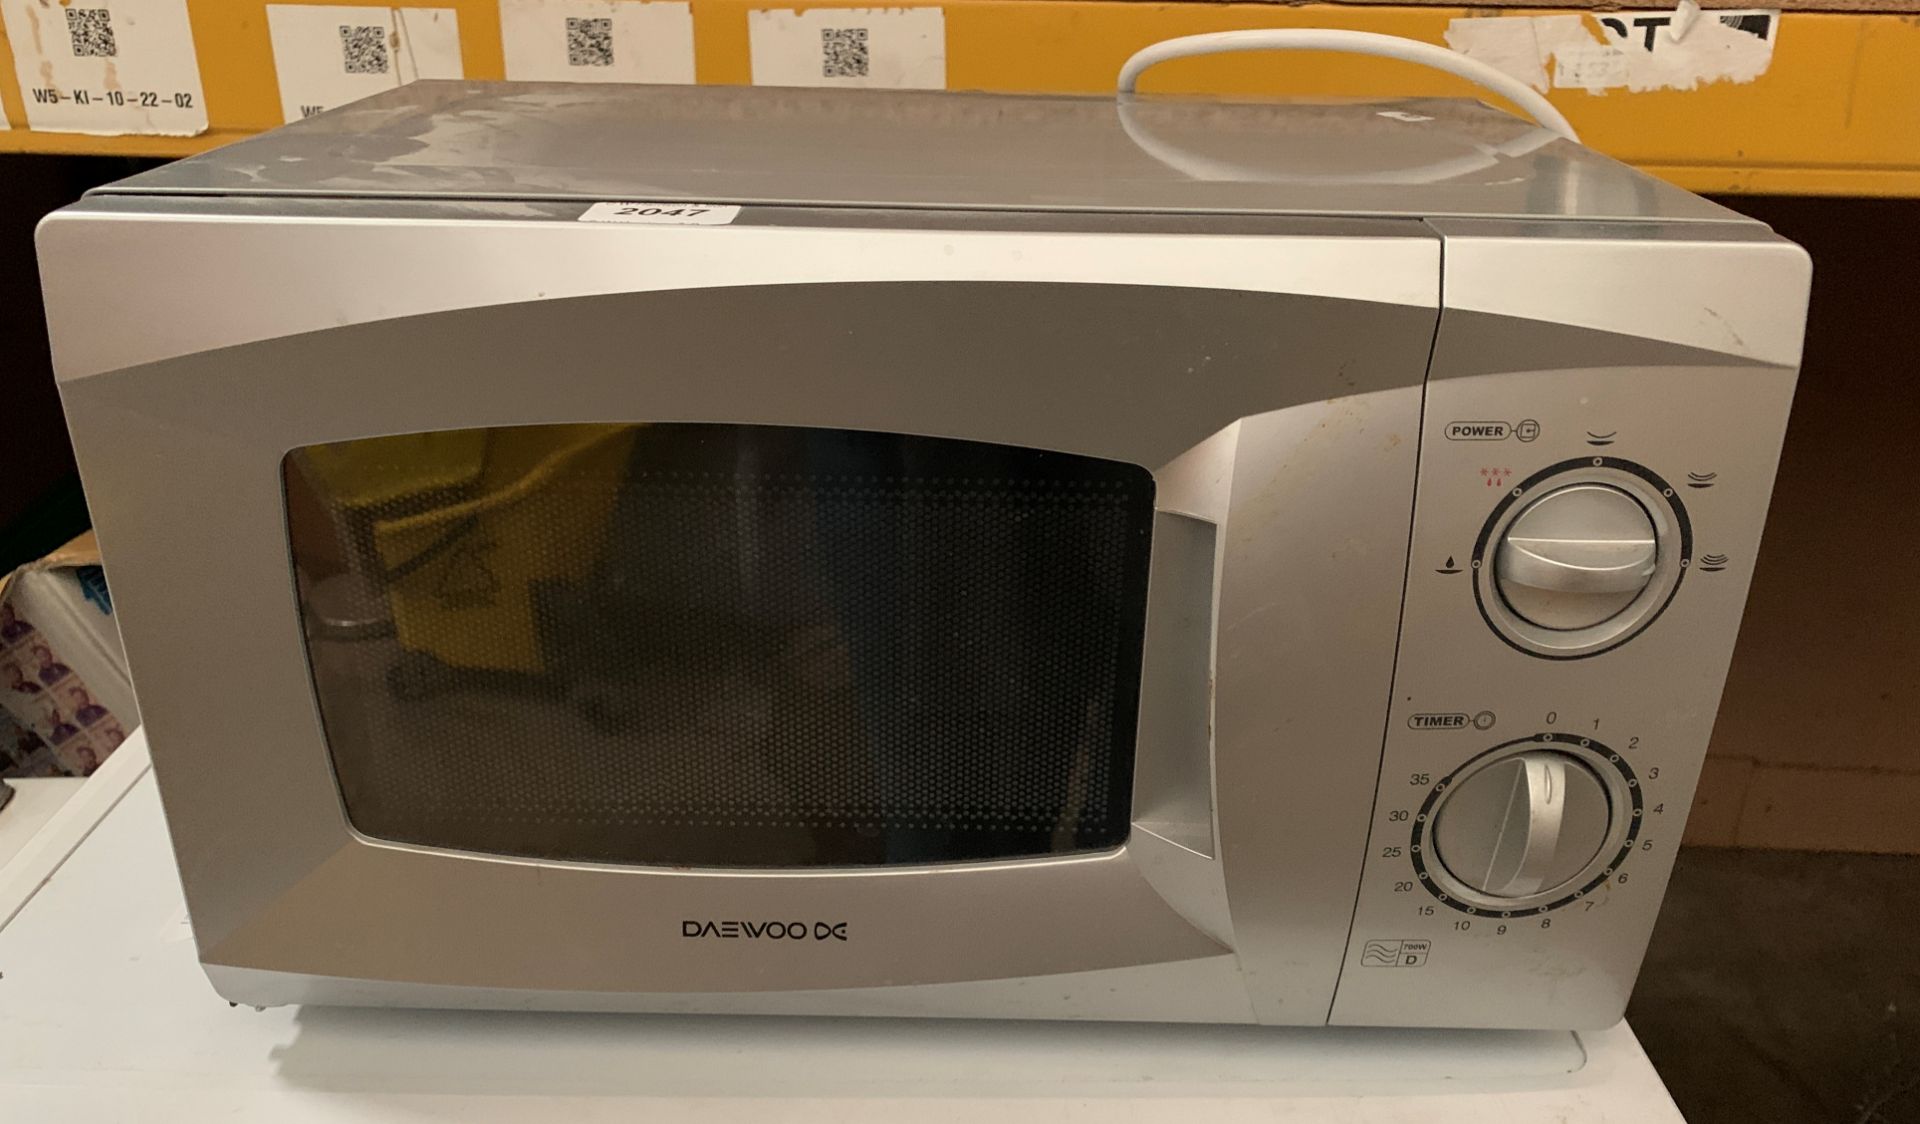 A Daewoo KOR-6L158L microwave oven